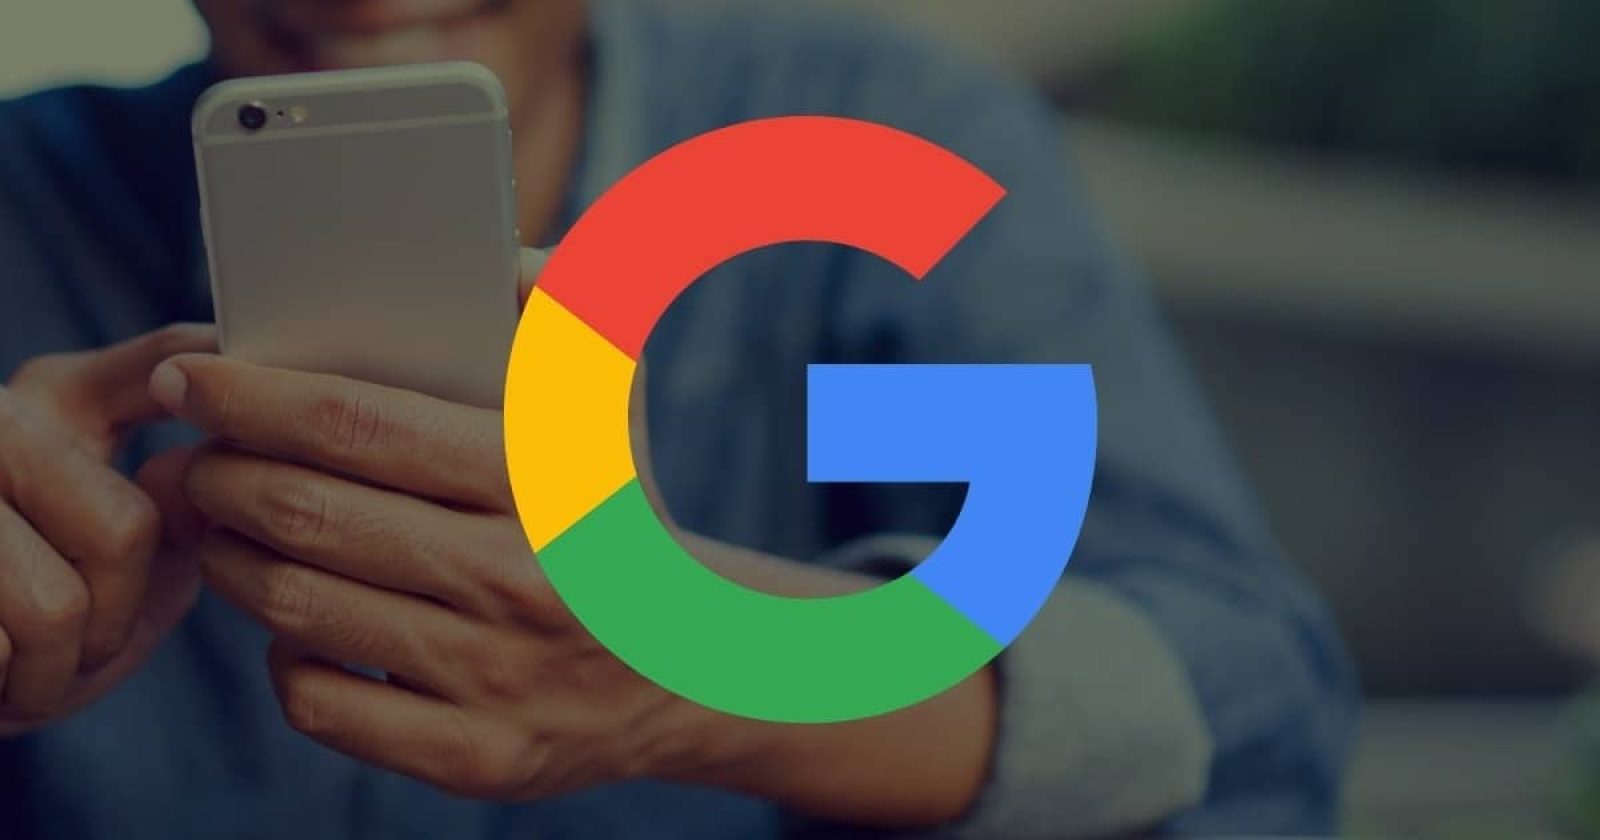 GOOGLE ADDS “REQUEST A QUOTE” BUTTON TO BUSINESS LISTINGS IN SEARCH RESULTS